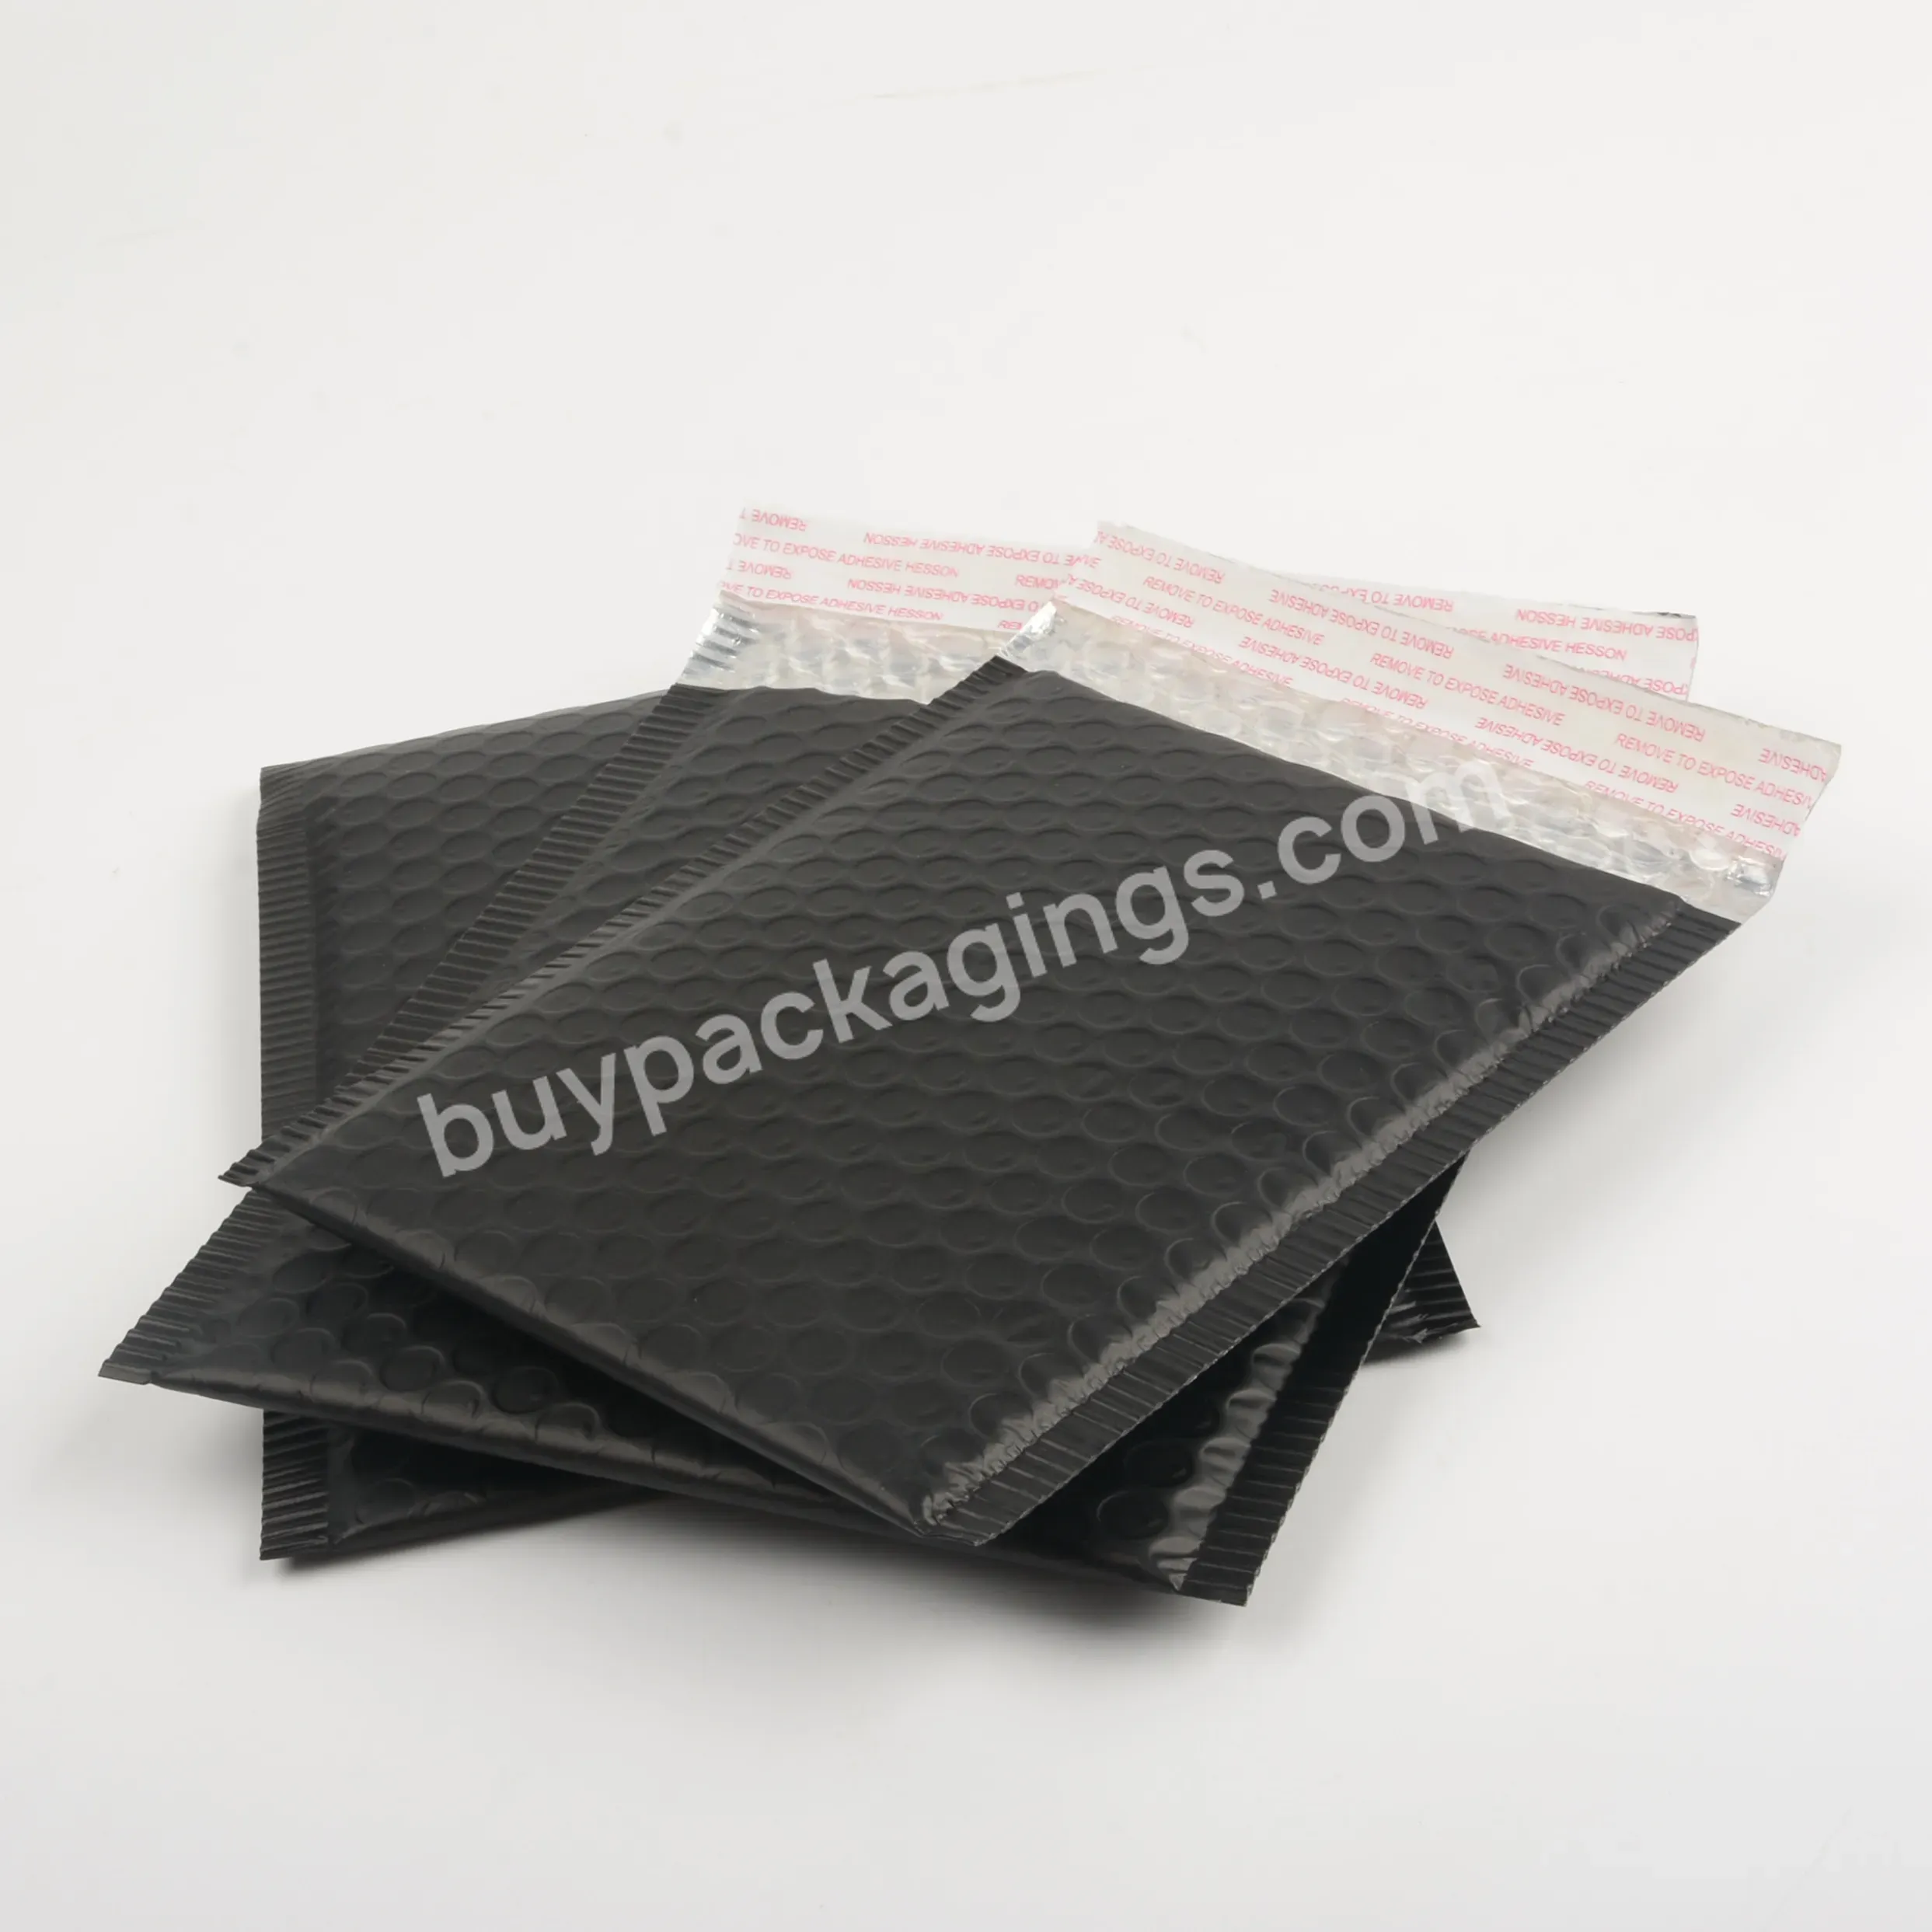 Eco-friendly Silver Matte Bubble Filled Envelope Bubble Air Packing Polymailer Bag Custom Bubble Envelope For Shipping Packaging - Buy Metalic Black Mailing Bag Bubble Colored Padded Envelope,Custom Printed Bubble Mailer Biodegradable,Compostable Shi